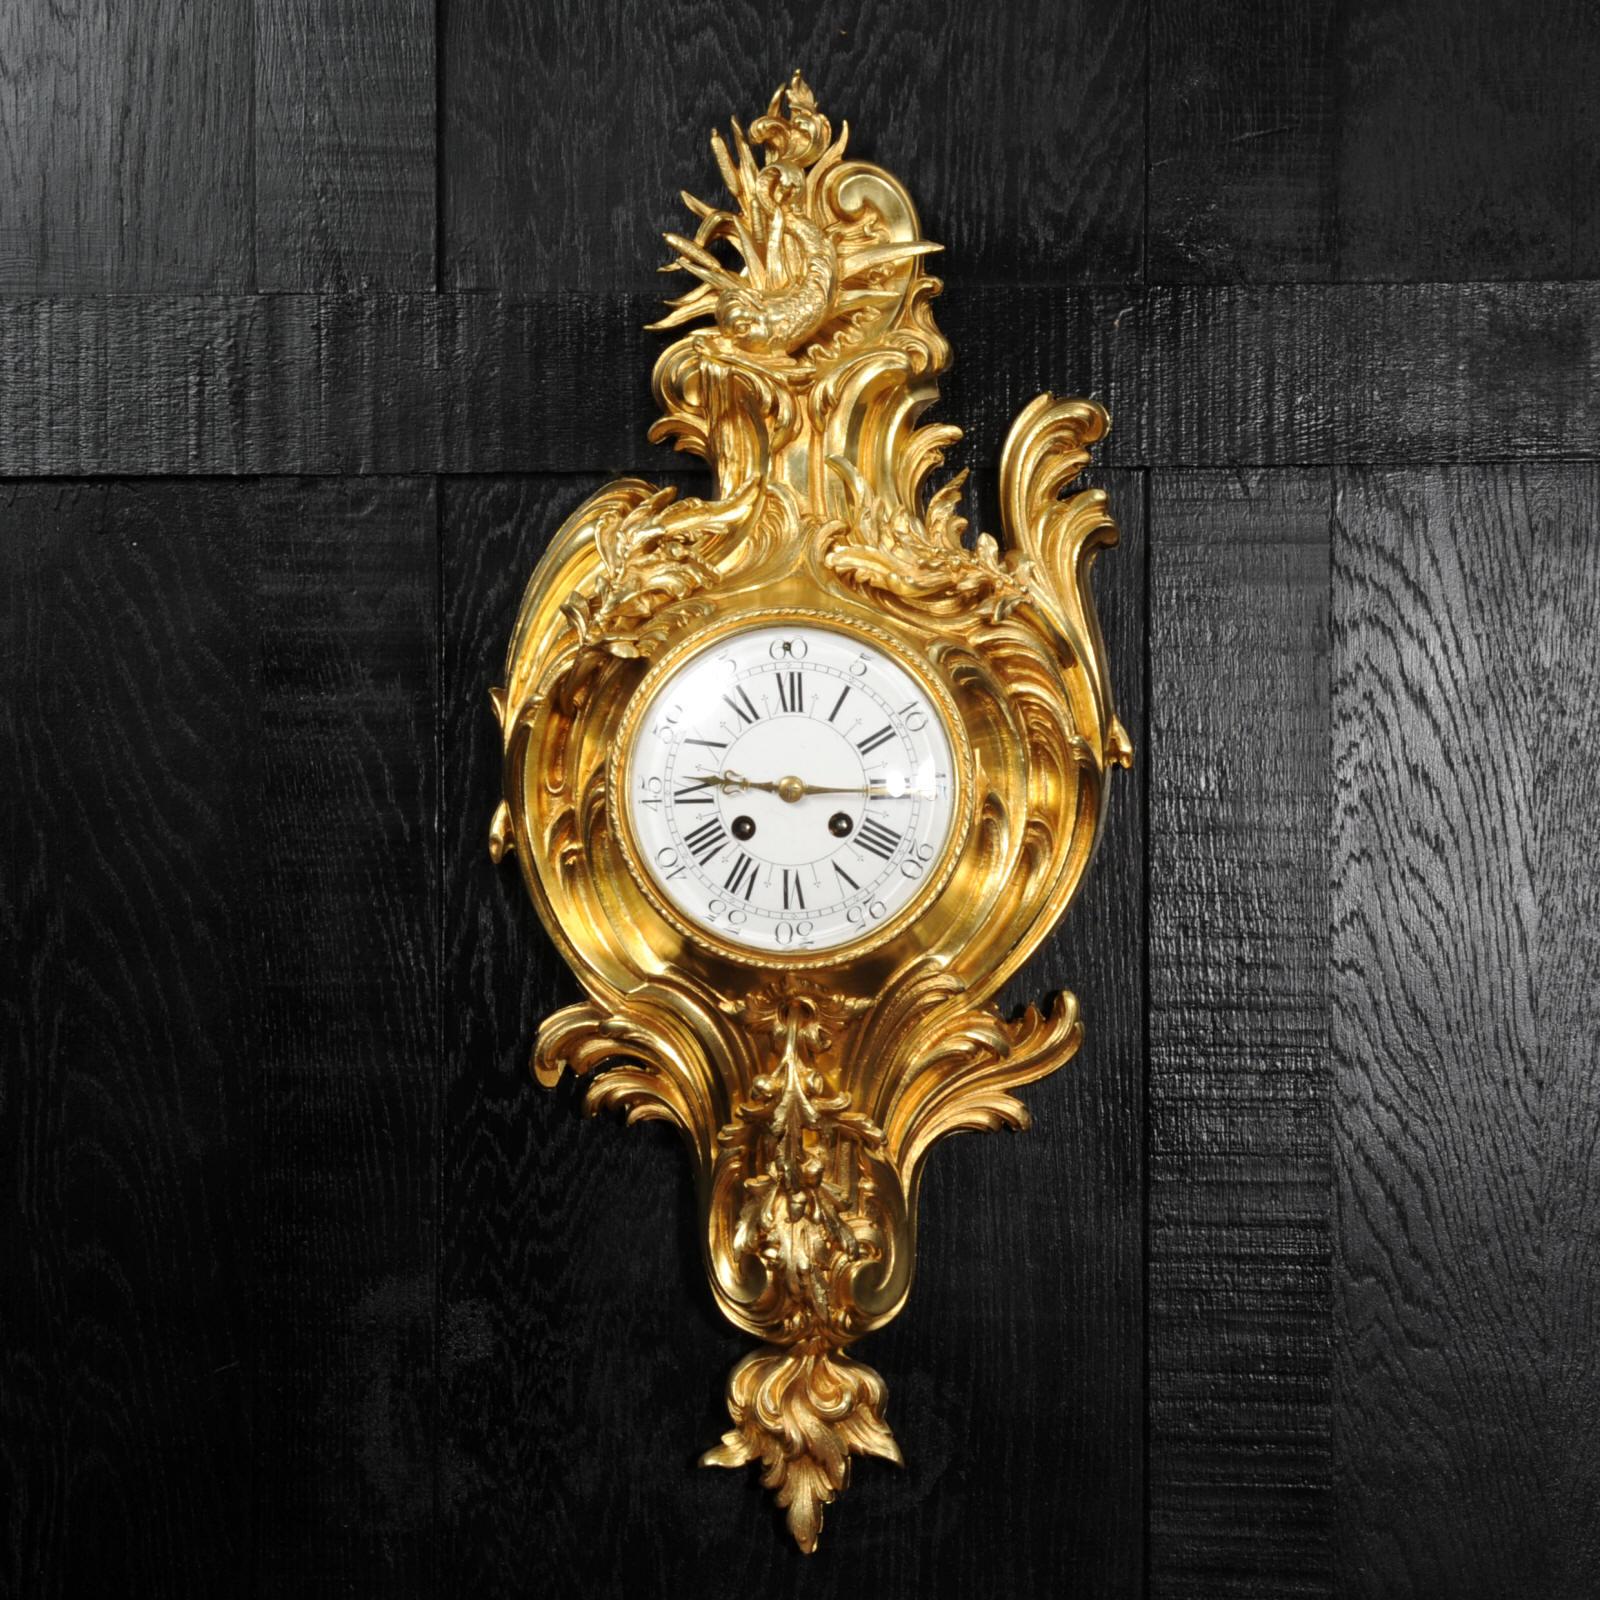 A beautiful original antique French cartel wall clock, circa 1880. It is finely made in ormolu (finely gilded bronze doré) in the Rococo style and features a dolphin to the top, riding a C scroll of surf. The case is formed of flowing splashes of